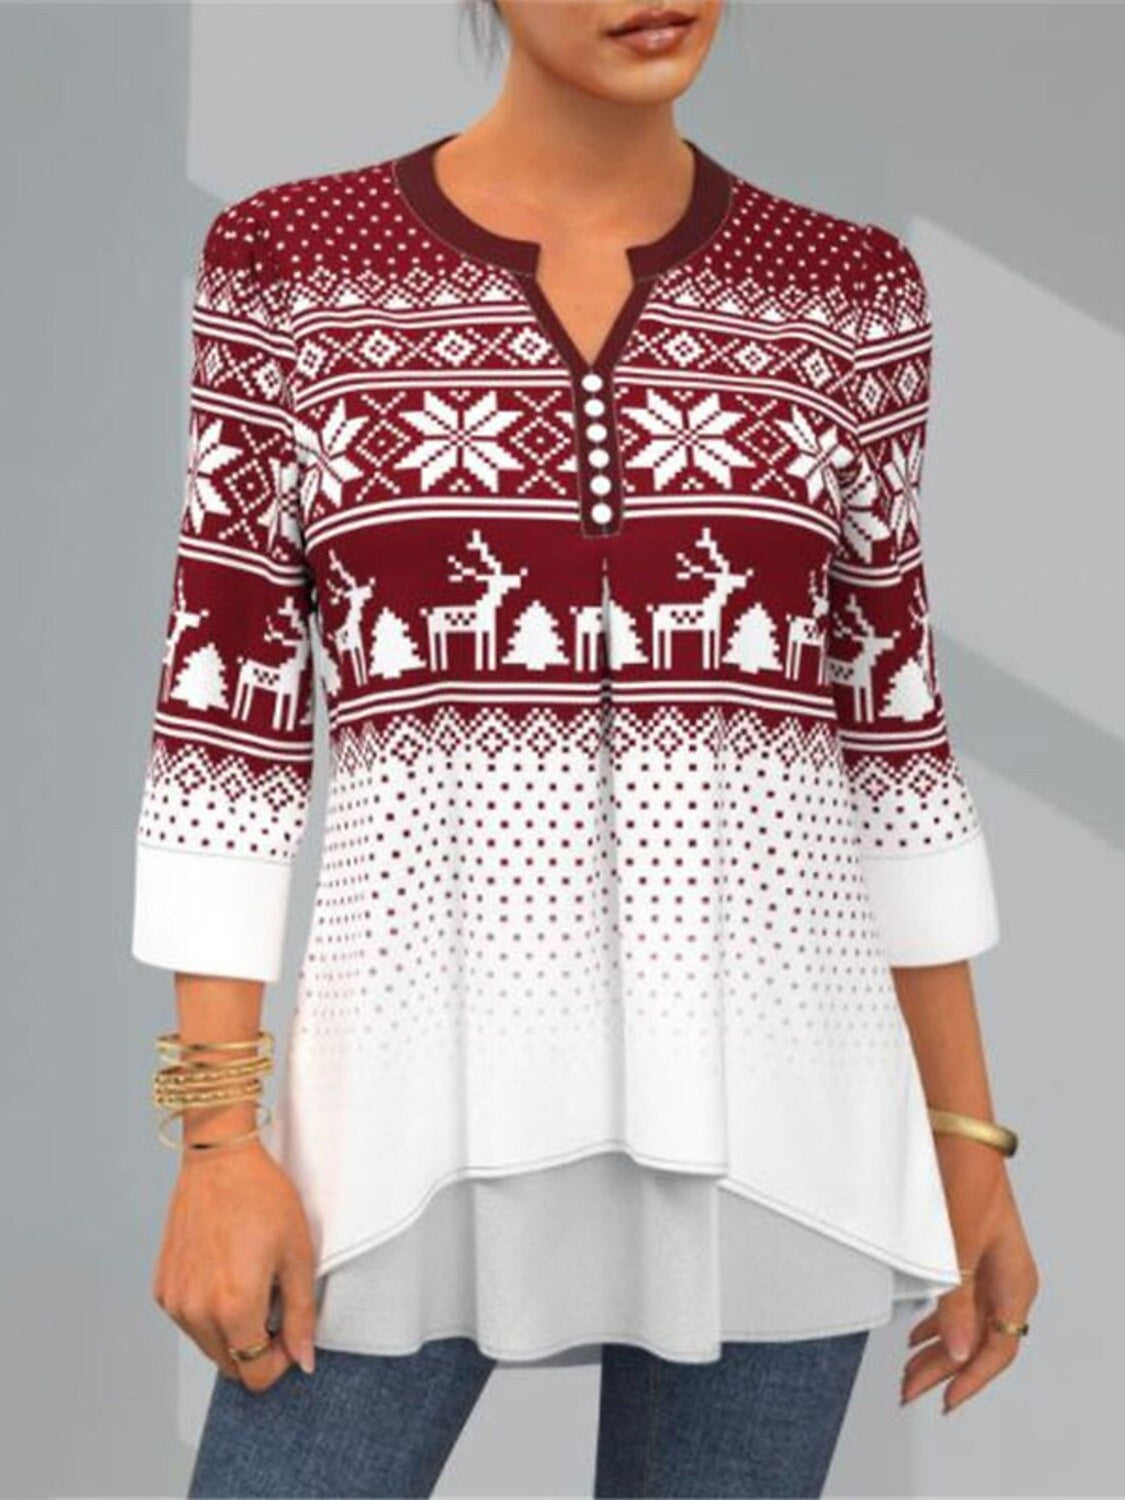 Women's Christmas 3/4 Sleeve V-neck Graphic Printed Top